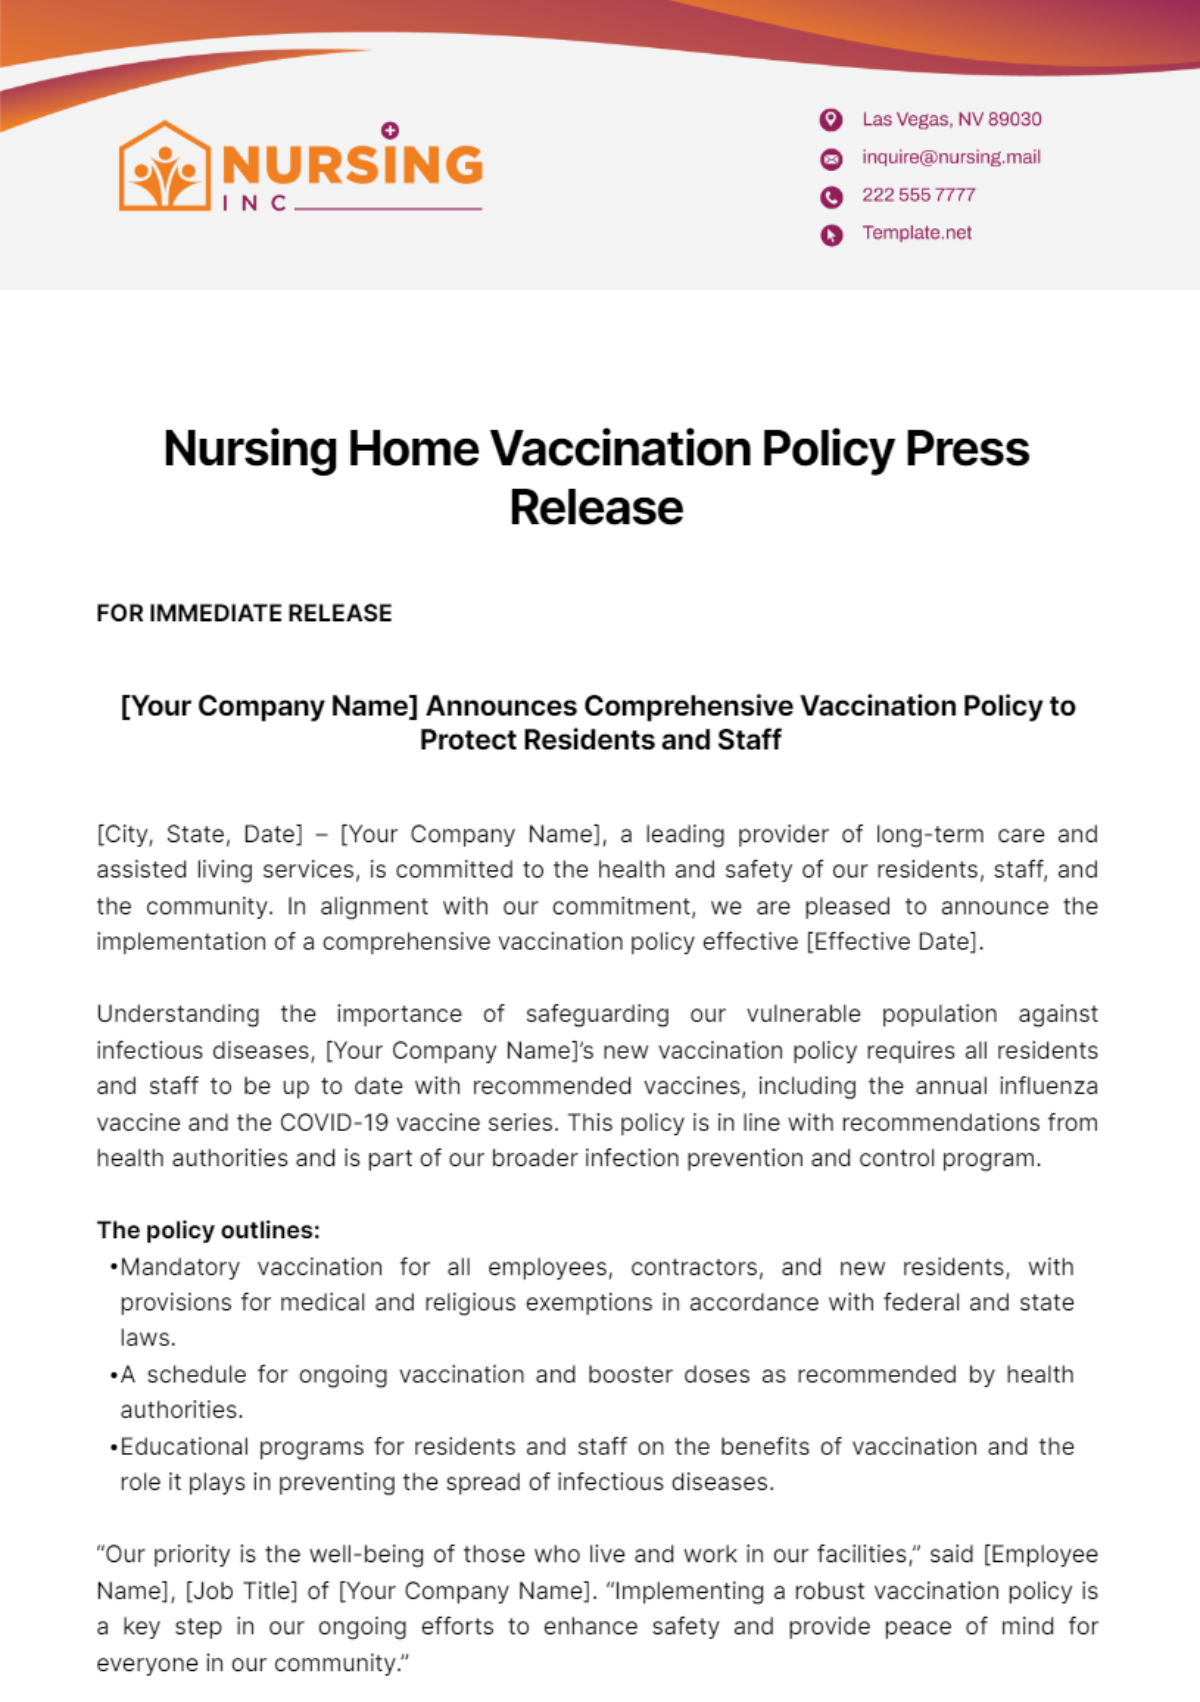 Nursing Home Vaccination Policy Press Release Template